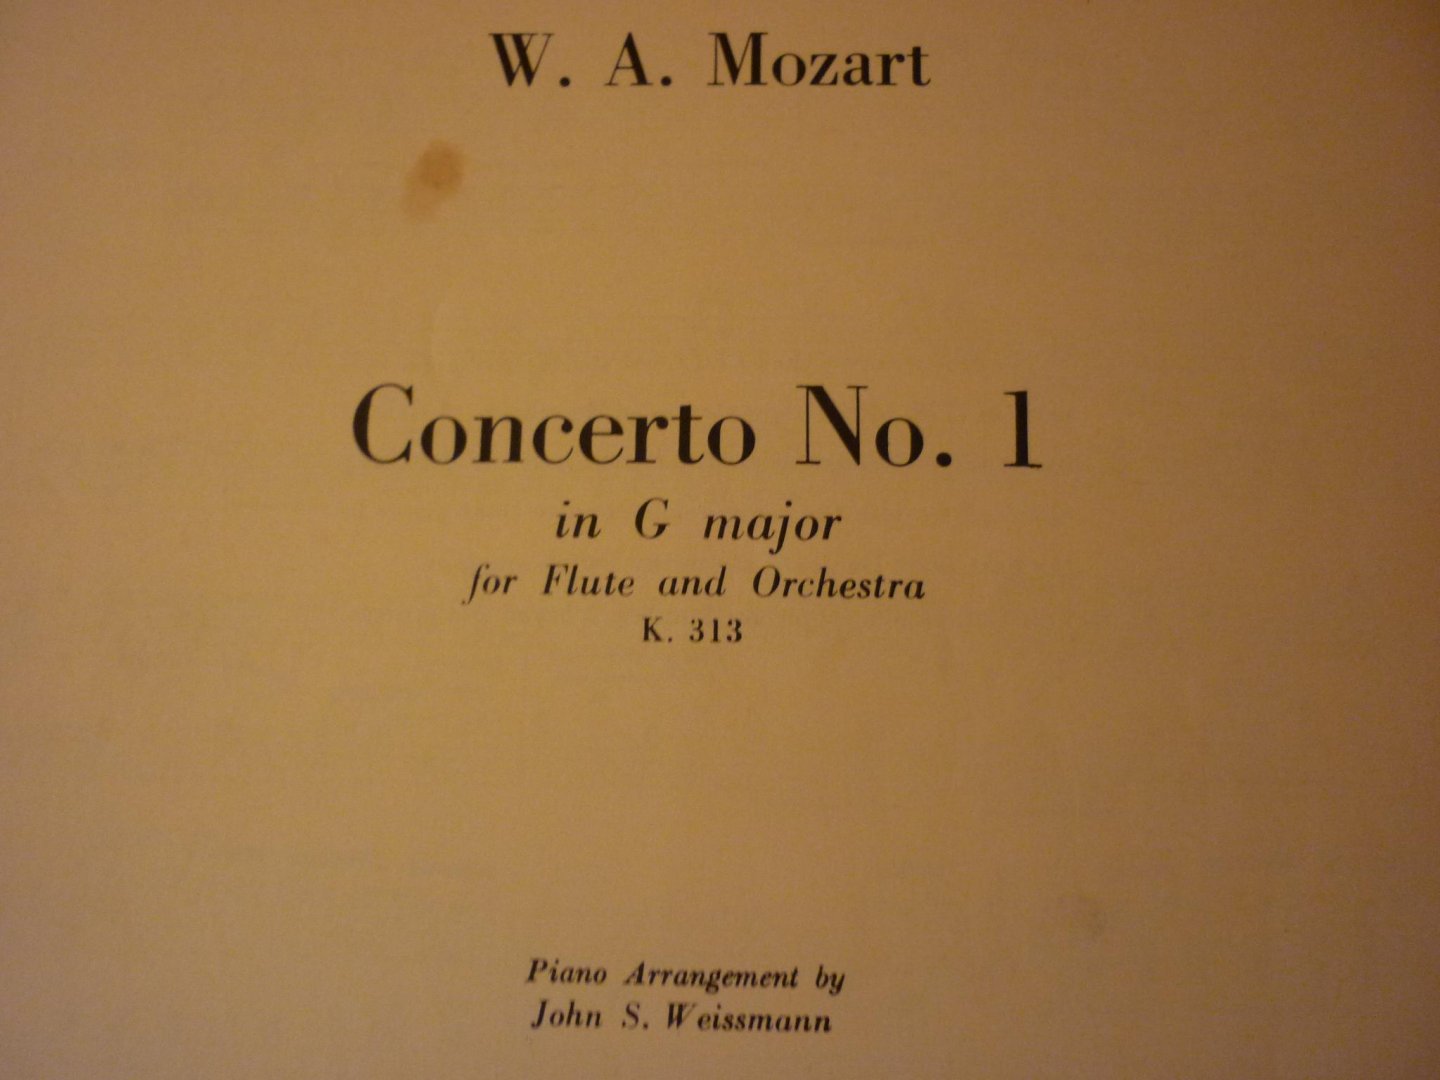 Mozart. W.A. (1756 – 1791) - Concerto No. 1 in G Major; Flute and Piano; K. 313 (Piano arrangement by John S. Weissmann)